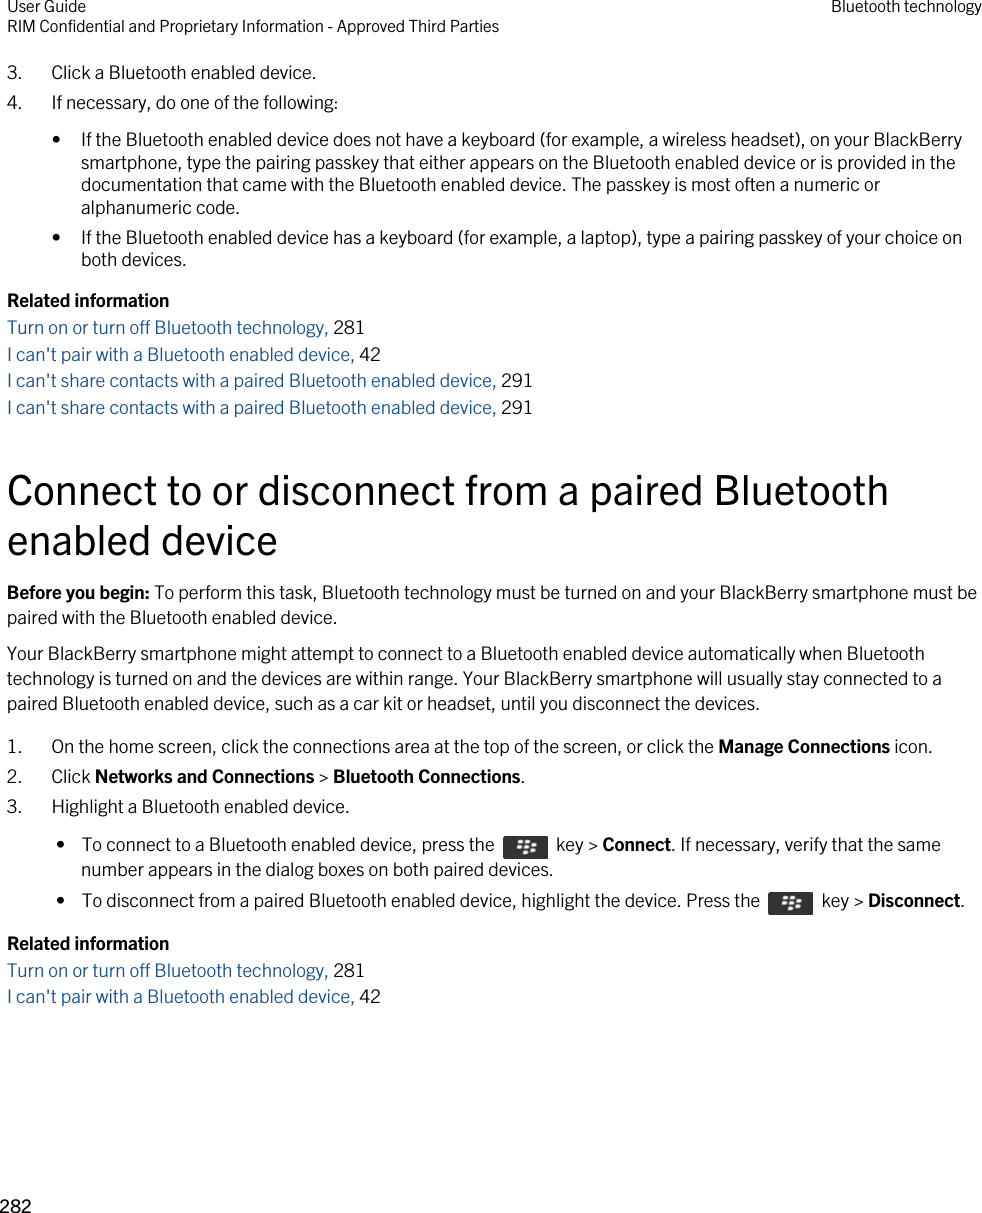 3. Click a Bluetooth enabled device.4. If necessary, do one of the following:• If the Bluetooth enabled device does not have a keyboard (for example, a wireless headset), on your BlackBerry smartphone, type the pairing passkey that either appears on the Bluetooth enabled device or is provided in the documentation that came with the Bluetooth enabled device. The passkey is most often a numeric or alphanumeric code.• If the Bluetooth enabled device has a keyboard (for example, a laptop), type a pairing passkey of your choice on both devices.Related informationTurn on or turn off Bluetooth technology, 281 I can&apos;t pair with a Bluetooth enabled device, 42 I can&apos;t share contacts with a paired Bluetooth enabled device, 291I can&apos;t share contacts with a paired Bluetooth enabled device, 291Connect to or disconnect from a paired Bluetooth enabled deviceBefore you begin: To perform this task, Bluetooth technology must be turned on and your BlackBerry smartphone must be paired with the Bluetooth enabled device.Your BlackBerry smartphone might attempt to connect to a Bluetooth enabled device automatically when Bluetooth technology is turned on and the devices are within range. Your BlackBerry smartphone will usually stay connected to a paired Bluetooth enabled device, such as a car kit or headset, until you disconnect the devices.1. On the home screen, click the connections area at the top of the screen, or click the Manage Connections icon.2. Click Networks and Connections &gt; Bluetooth Connections.3. Highlight a Bluetooth enabled device. •  To connect to a Bluetooth enabled device, press the    key &gt; Connect. If necessary, verify that the same number appears in the dialog boxes on both paired devices. •  To disconnect from a paired Bluetooth enabled device, highlight the device. Press the    key &gt; Disconnect.Related informationTurn on or turn off Bluetooth technology, 281 I can&apos;t pair with a Bluetooth enabled device, 42 User GuideRIM Confidential and Proprietary Information - Approved Third Parties Bluetooth technology282 